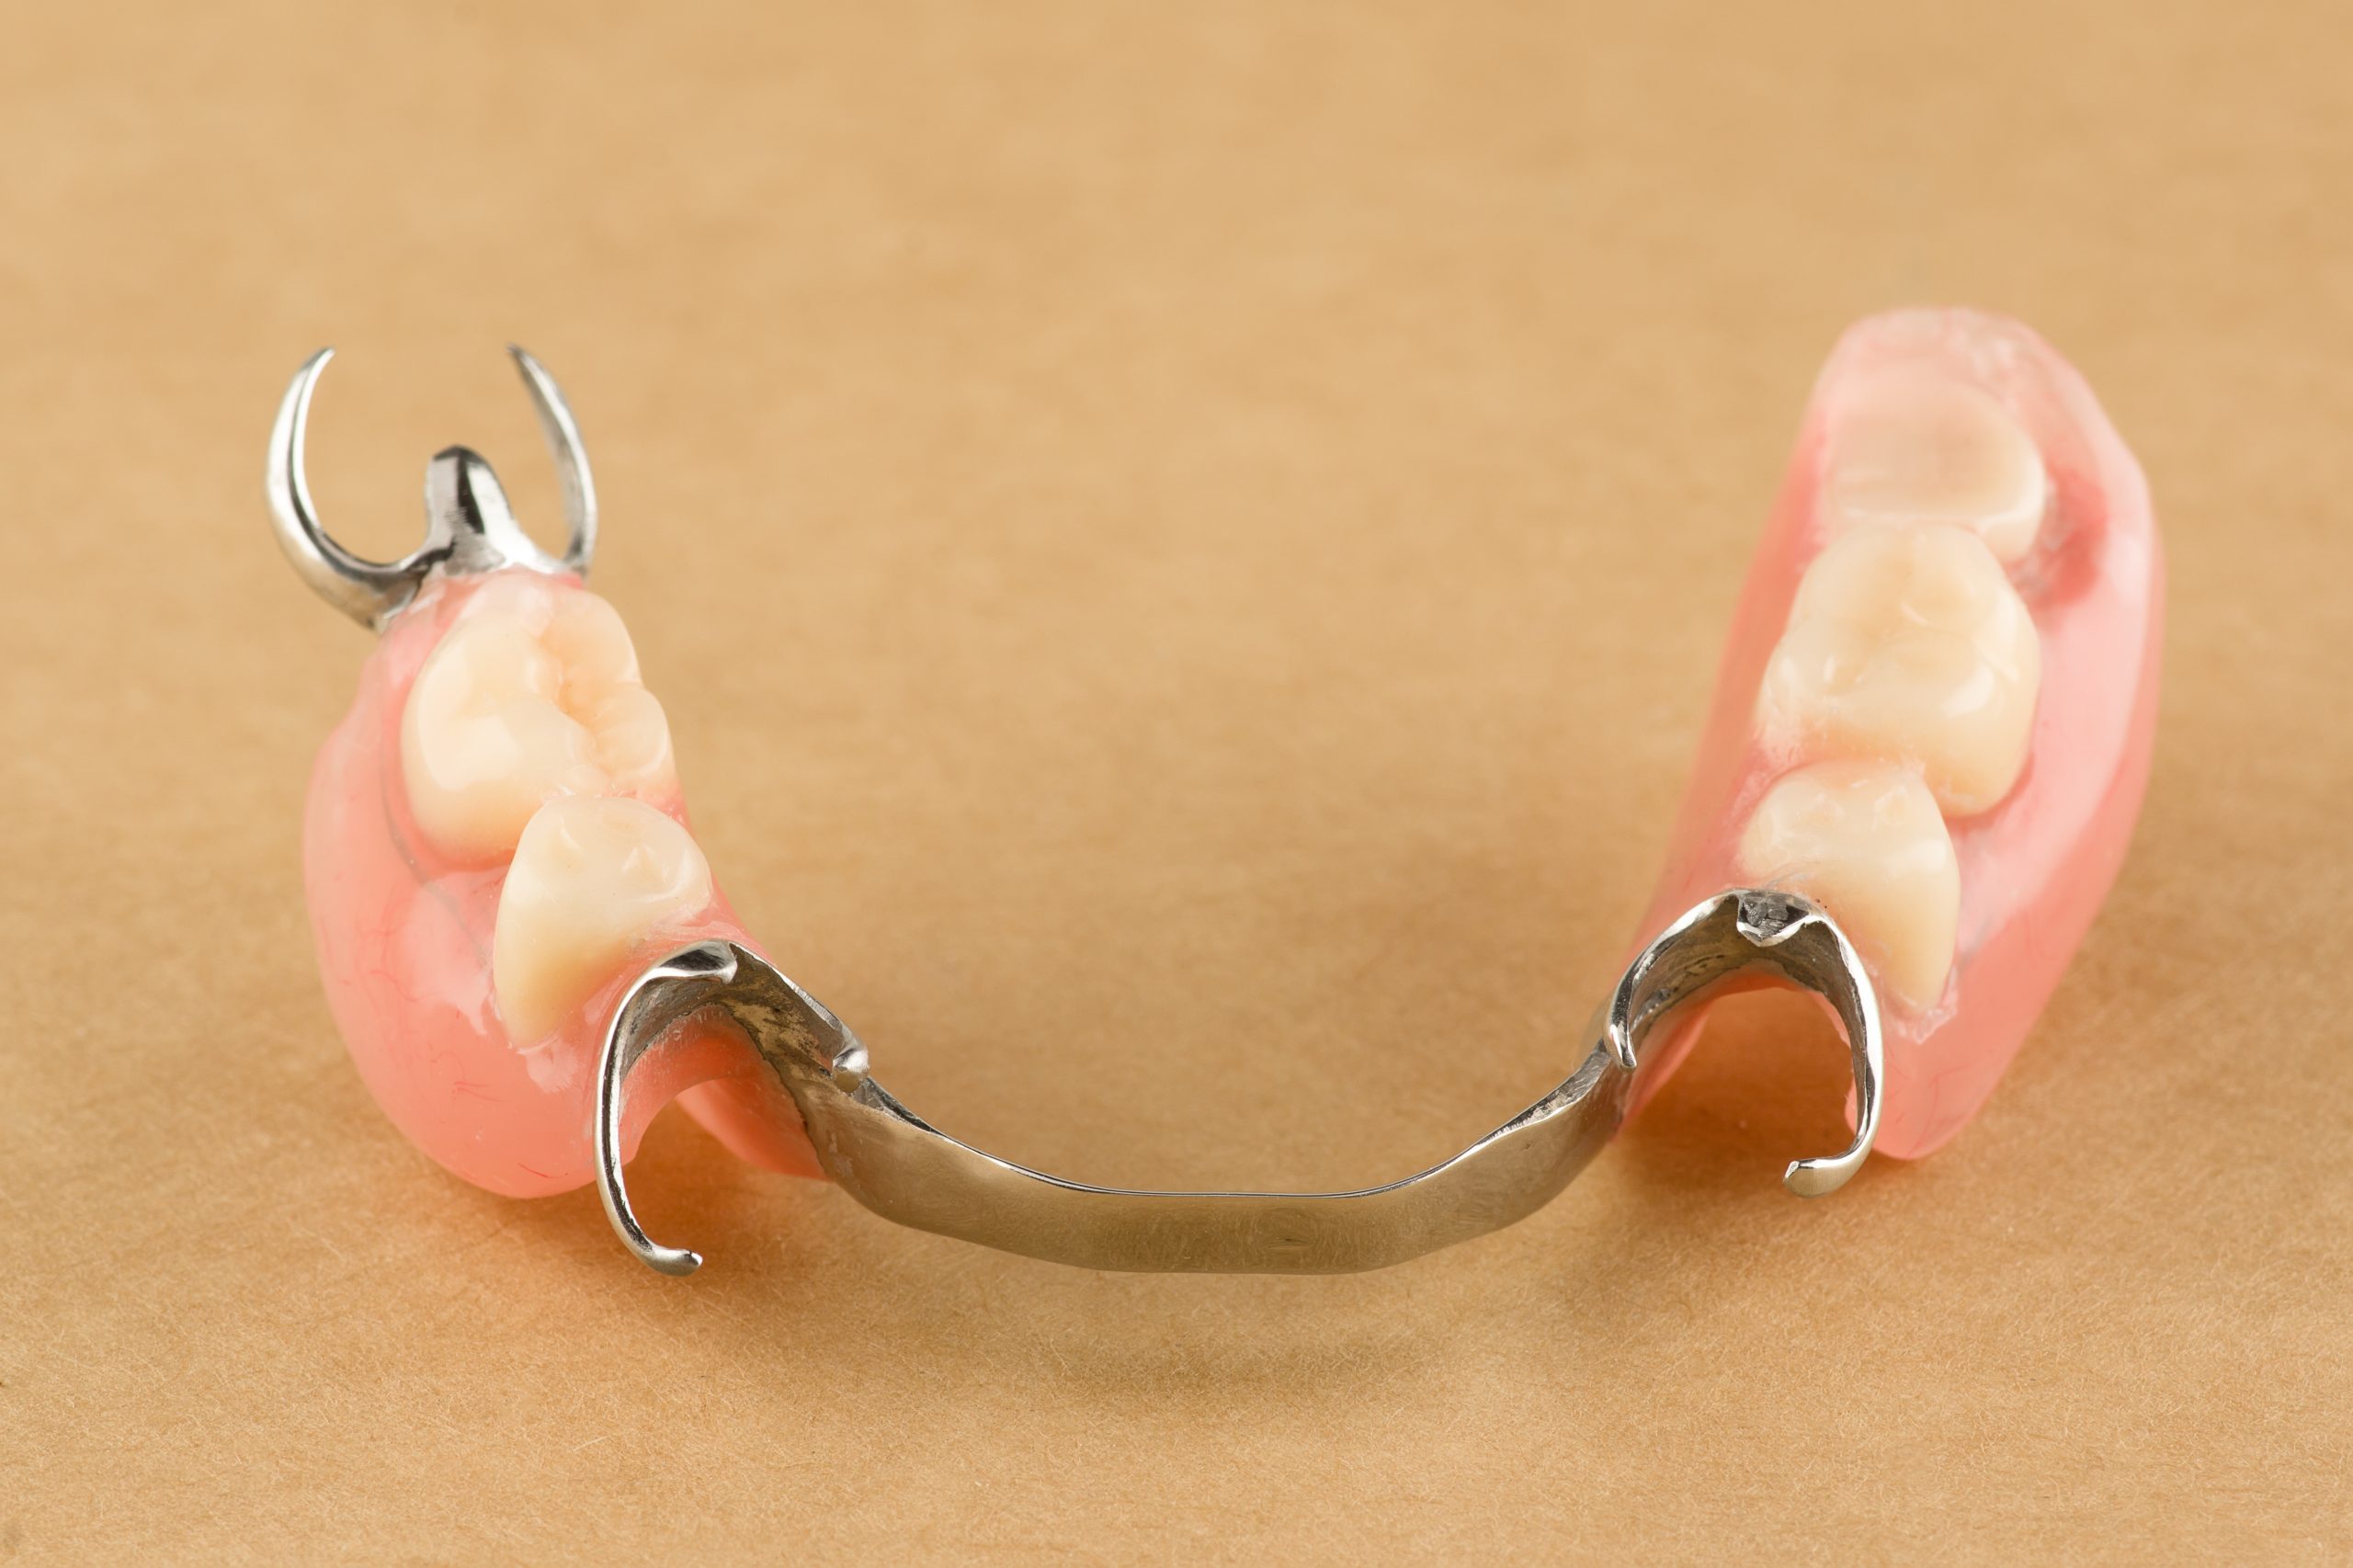 arc dental prosthesis lies on a wooden background